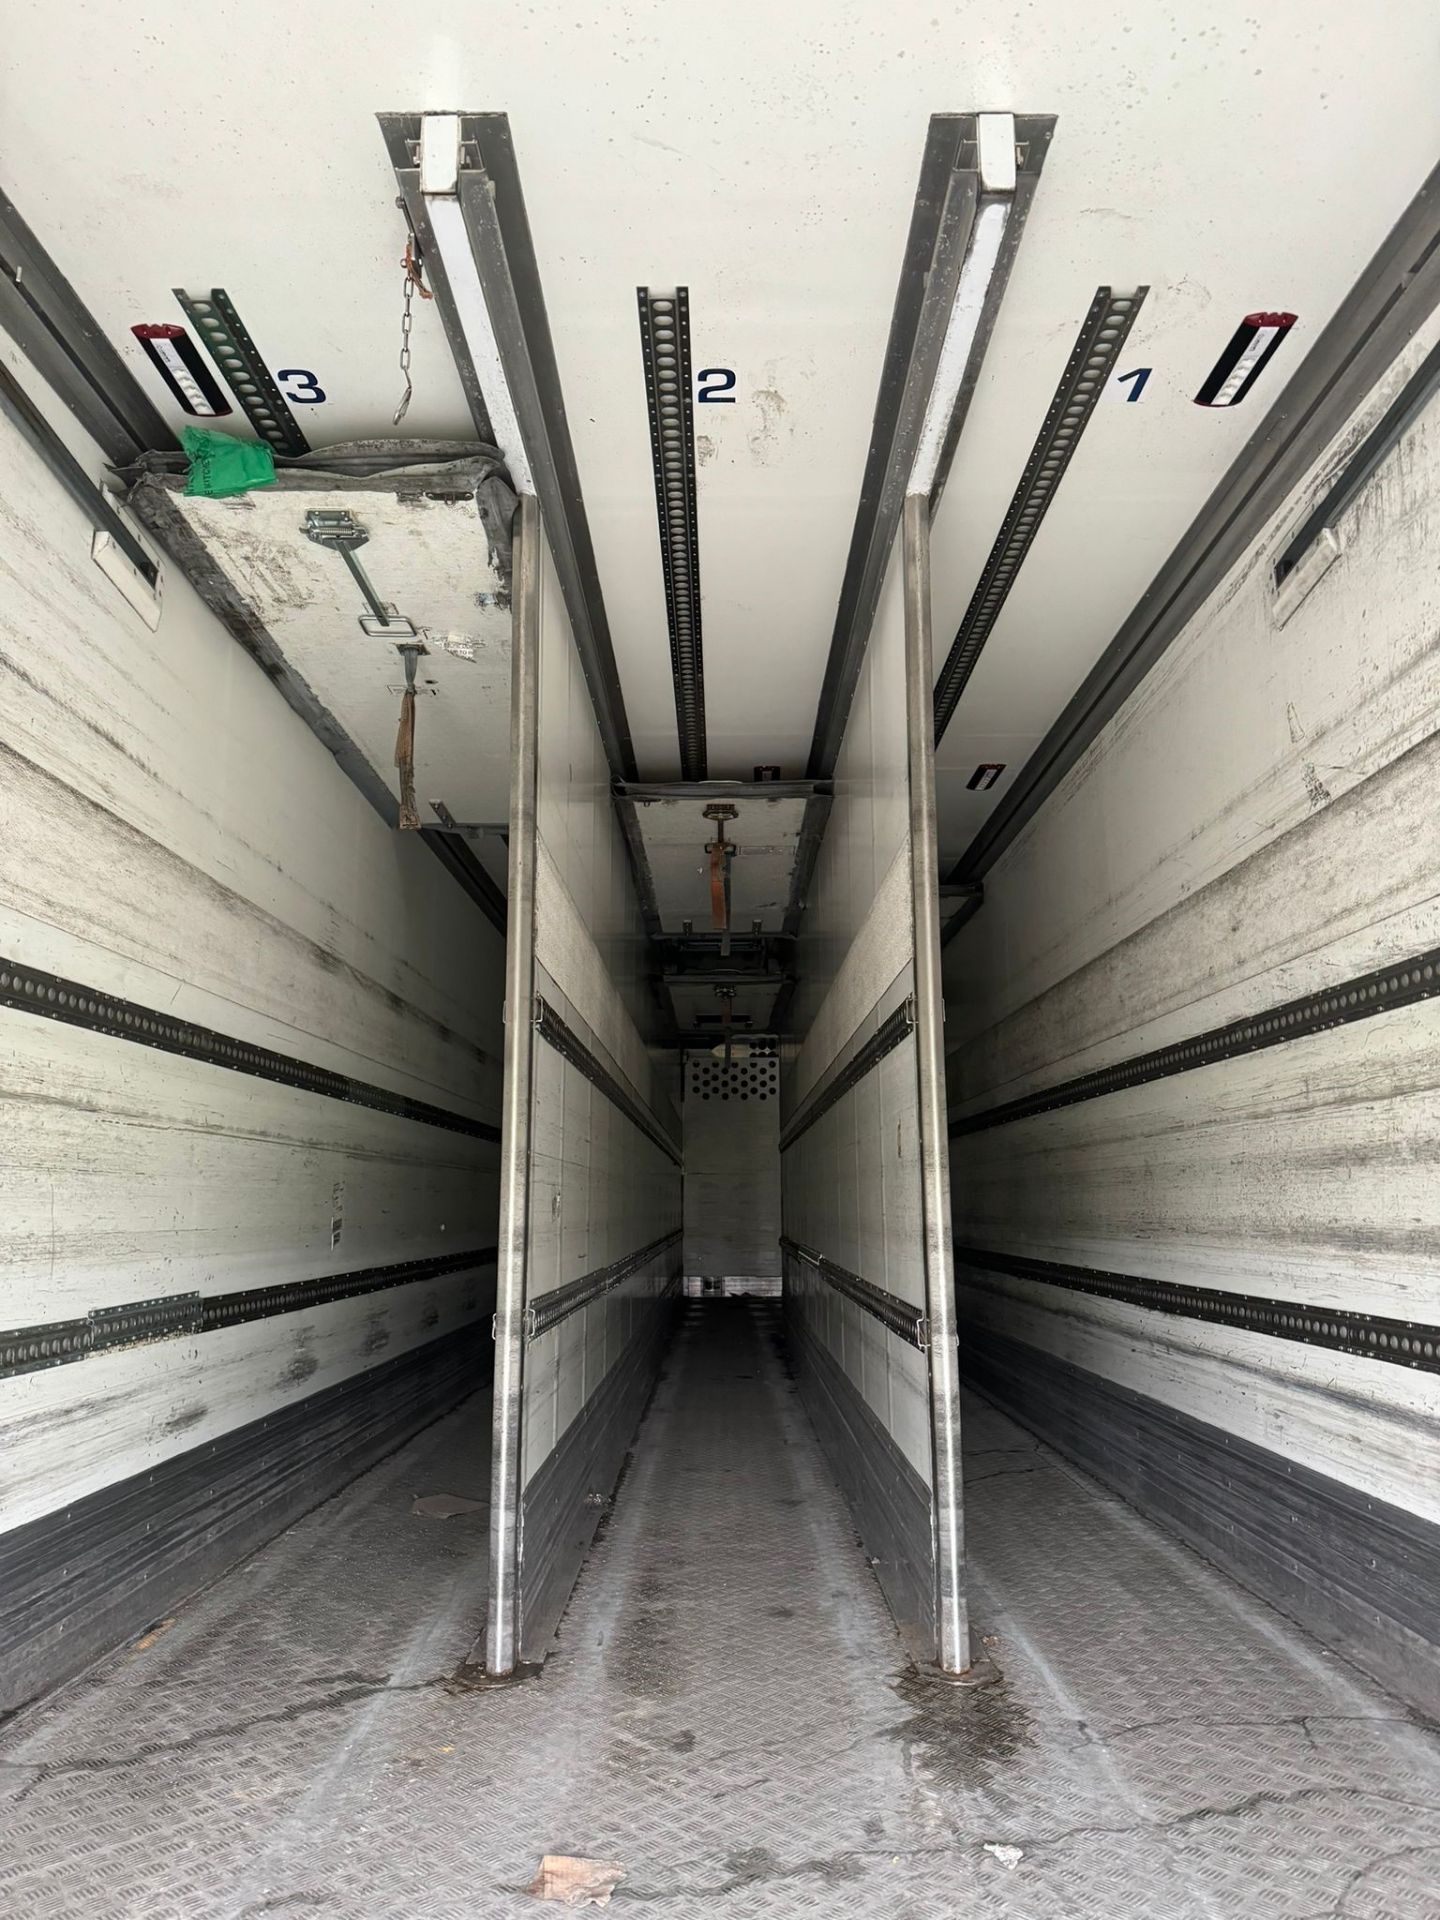 2014 G&A 13.6m Tandem Axle Refrigerated Multi-Temp Trailer - Image 12 of 15